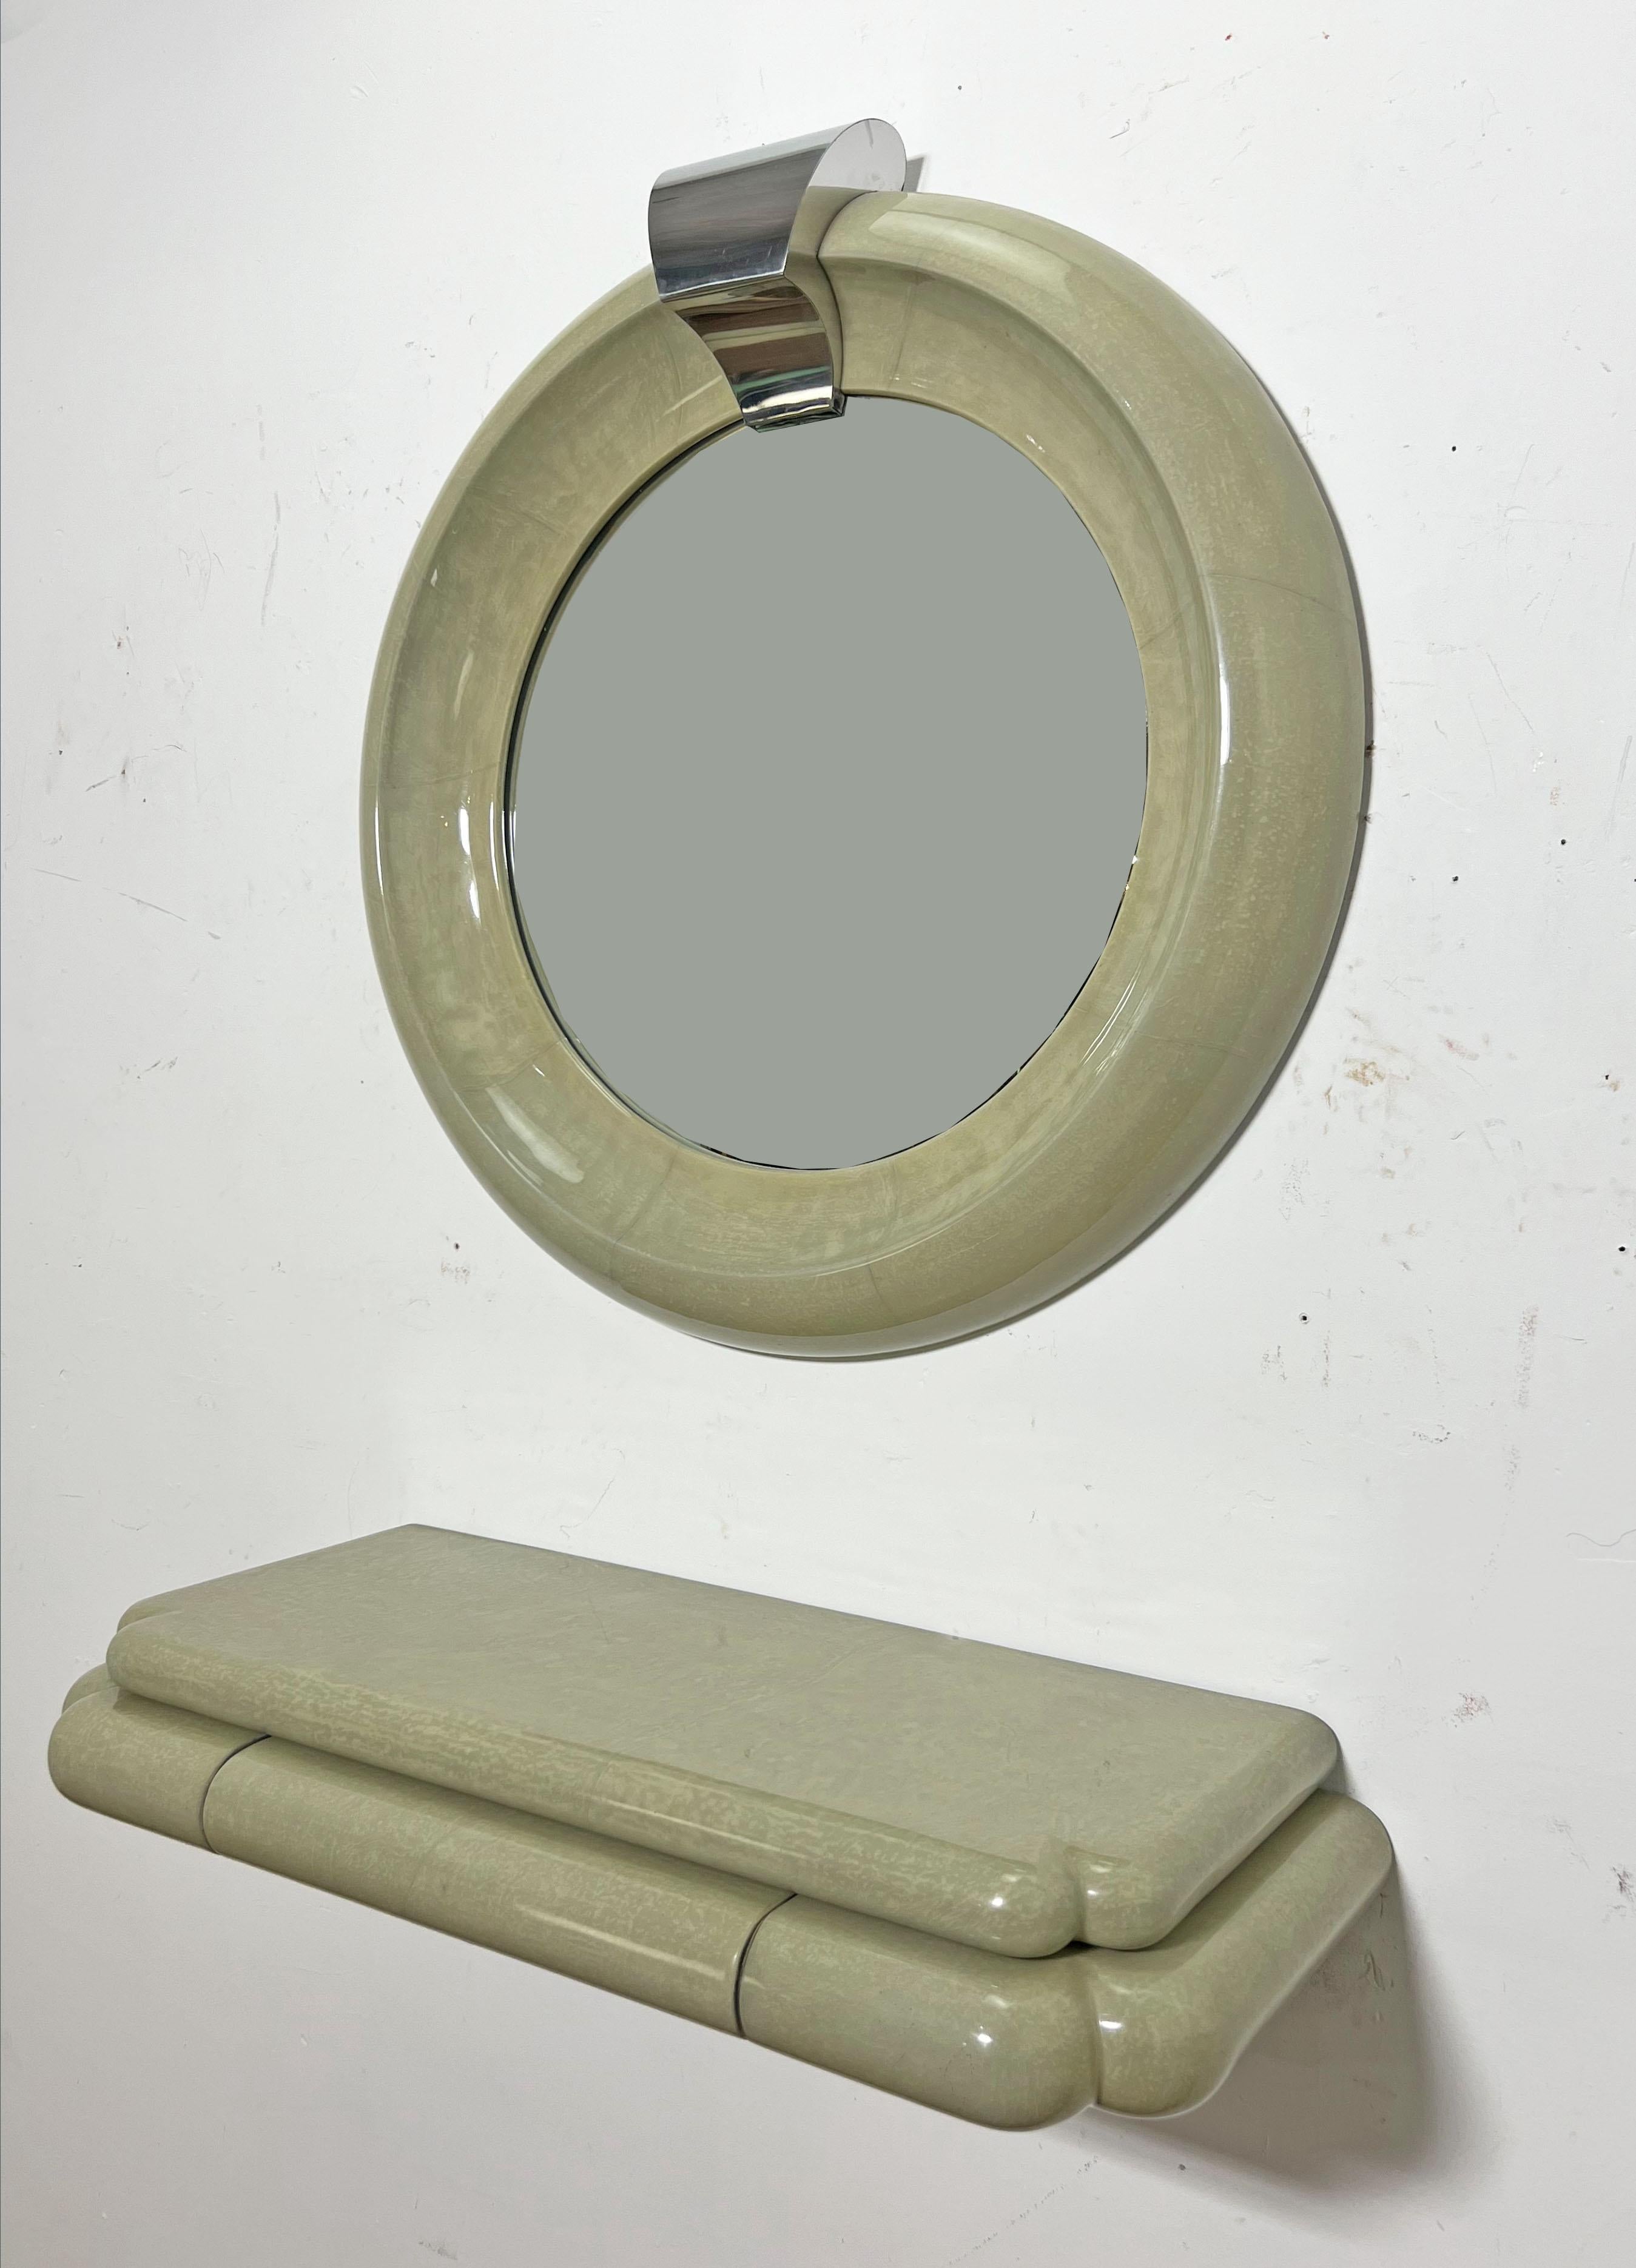 Signed Jimeco Ltda wall mirror and matching wall mounted console with single drawer, in celadon lacquered goatskin, made in Columbia and dated 1987.

Mirror measures: 37